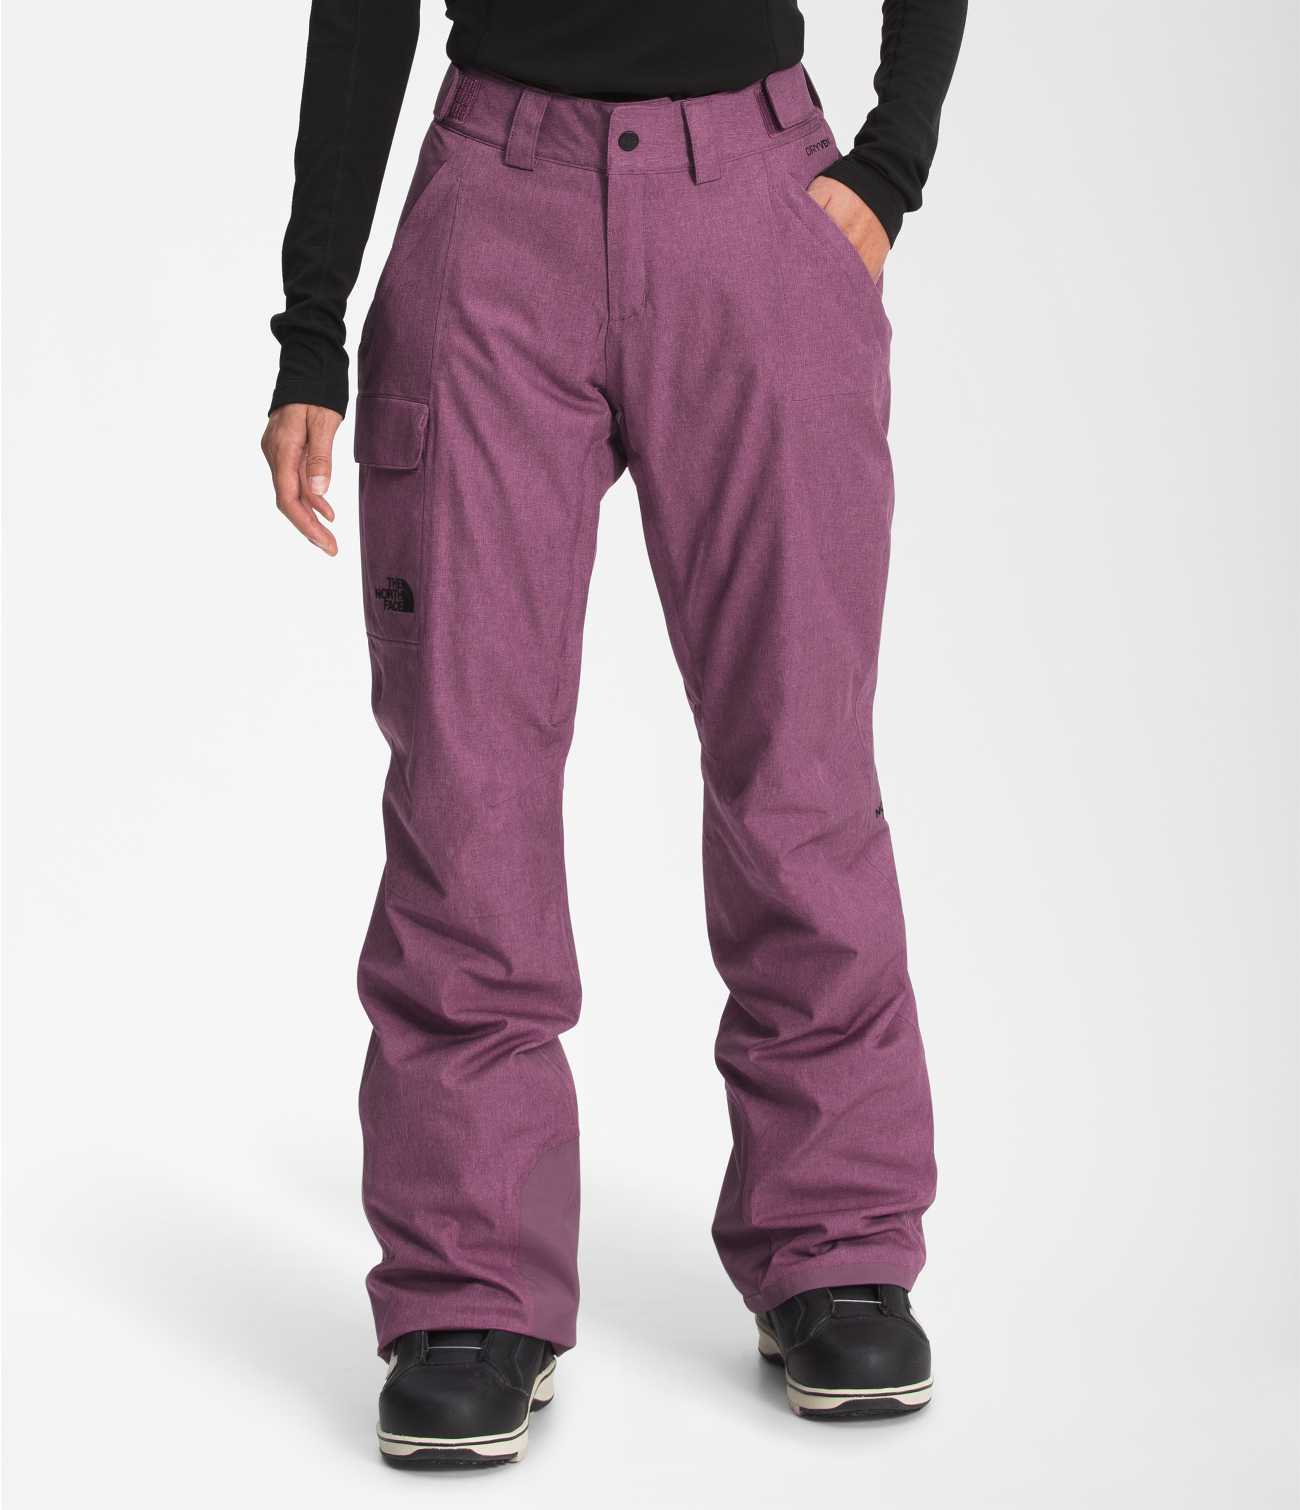 WOMEN'S FREEDOM INSULATED PANT | The North Face | The North Face 